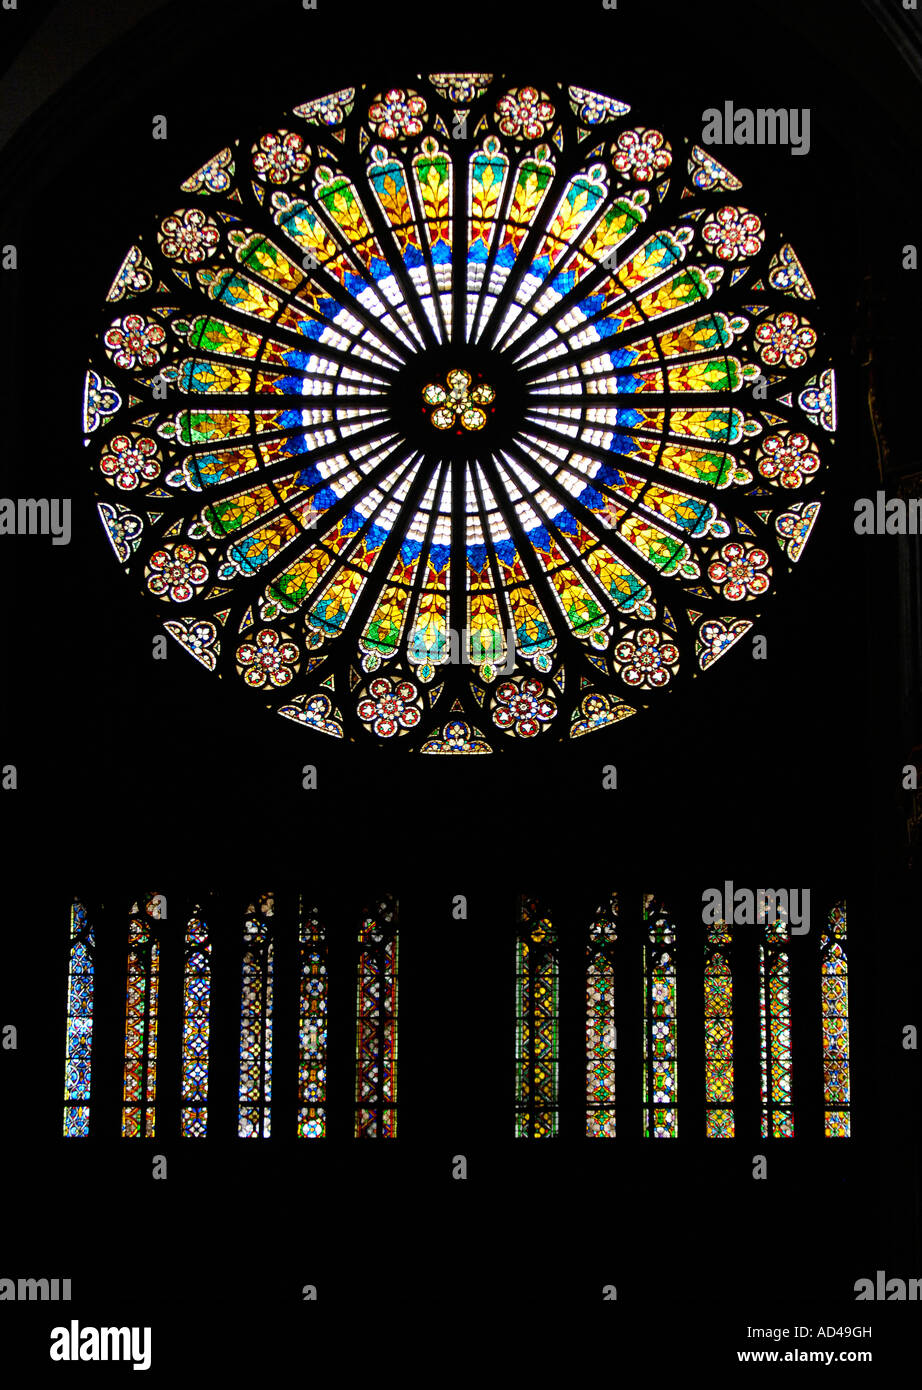 Rose window of Cathedral of our Lady of Strasbourg, Strasbourg, Alsace, France Stock Photo